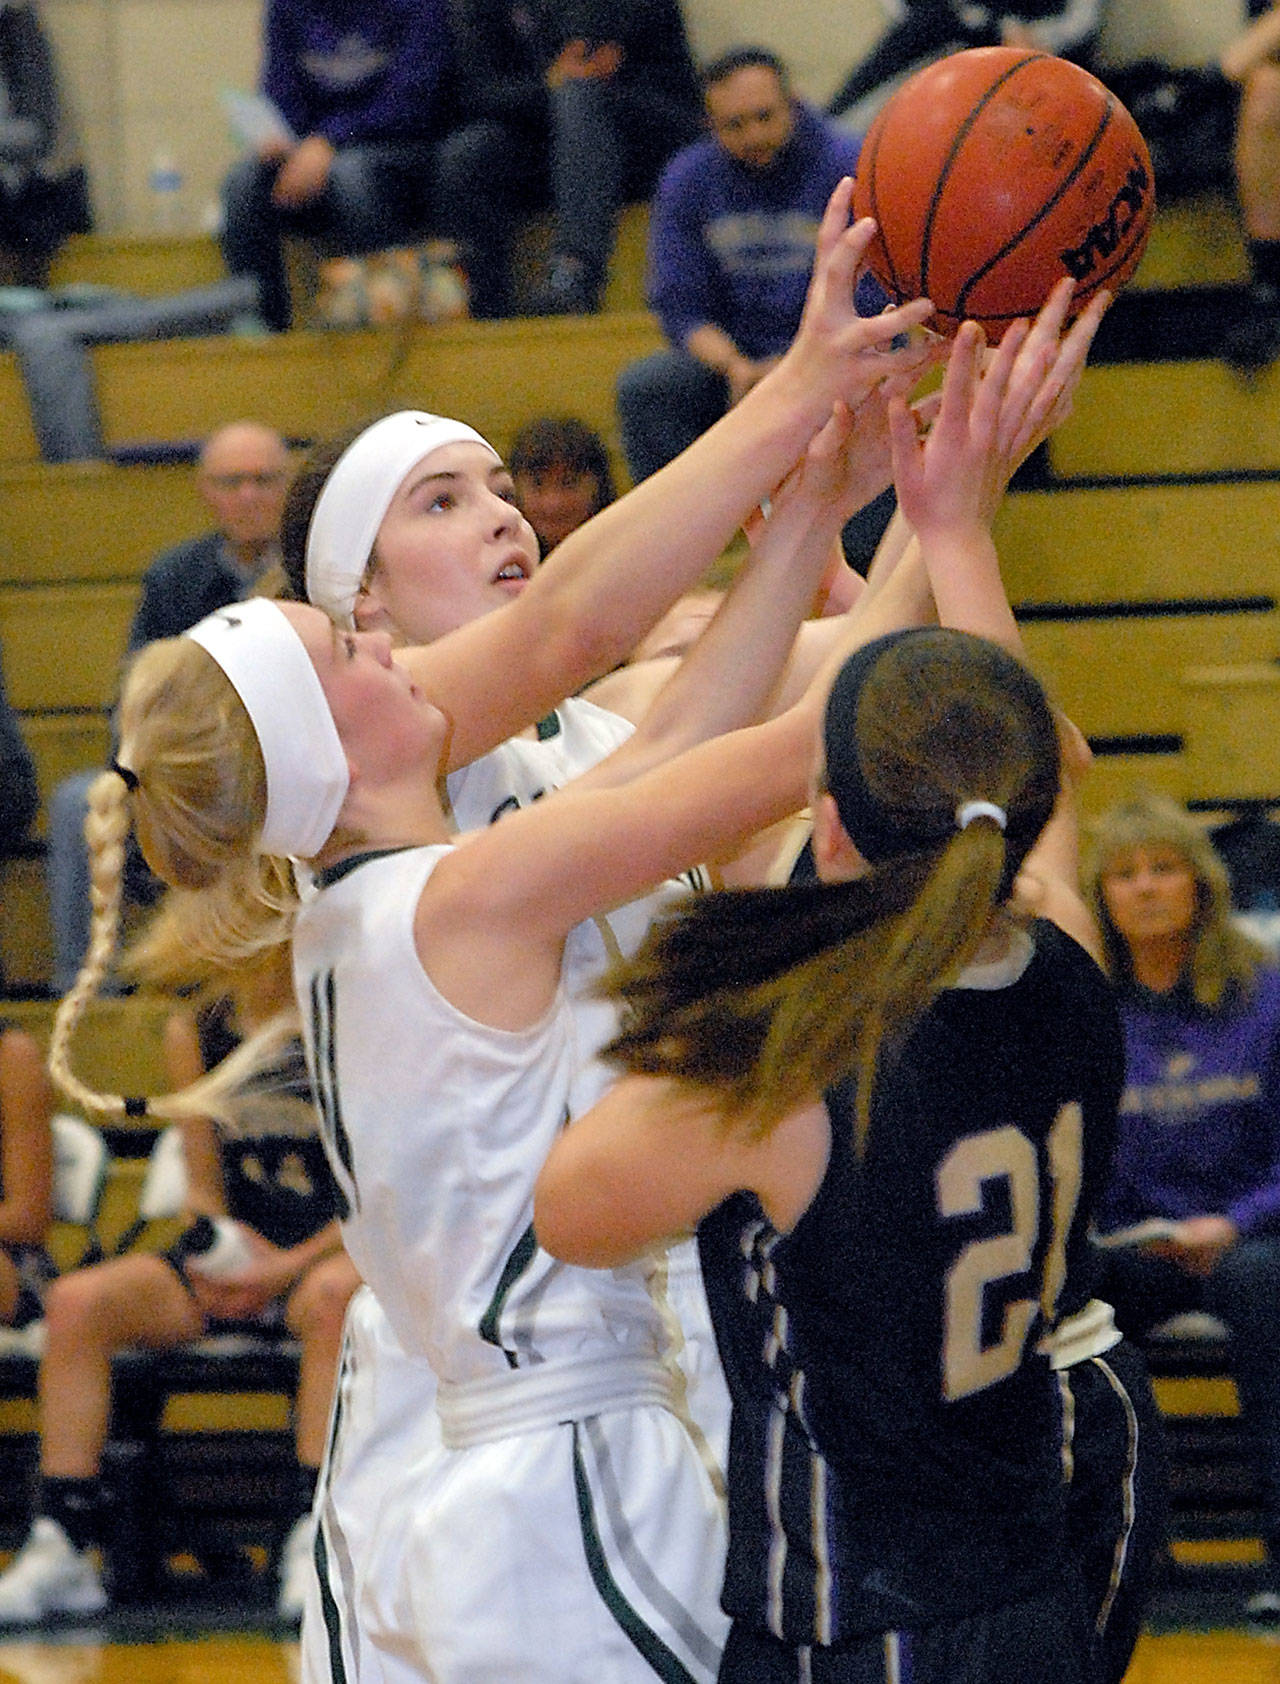 Keith Thorpe/Peninsula Daily News Port Angeles’ Gracie Long, left, and Devin Edwards, center, battle for a rebound with Sequim’s Kalli Wiker, right, in second-quarter play on Wednesday in Port Angeles.